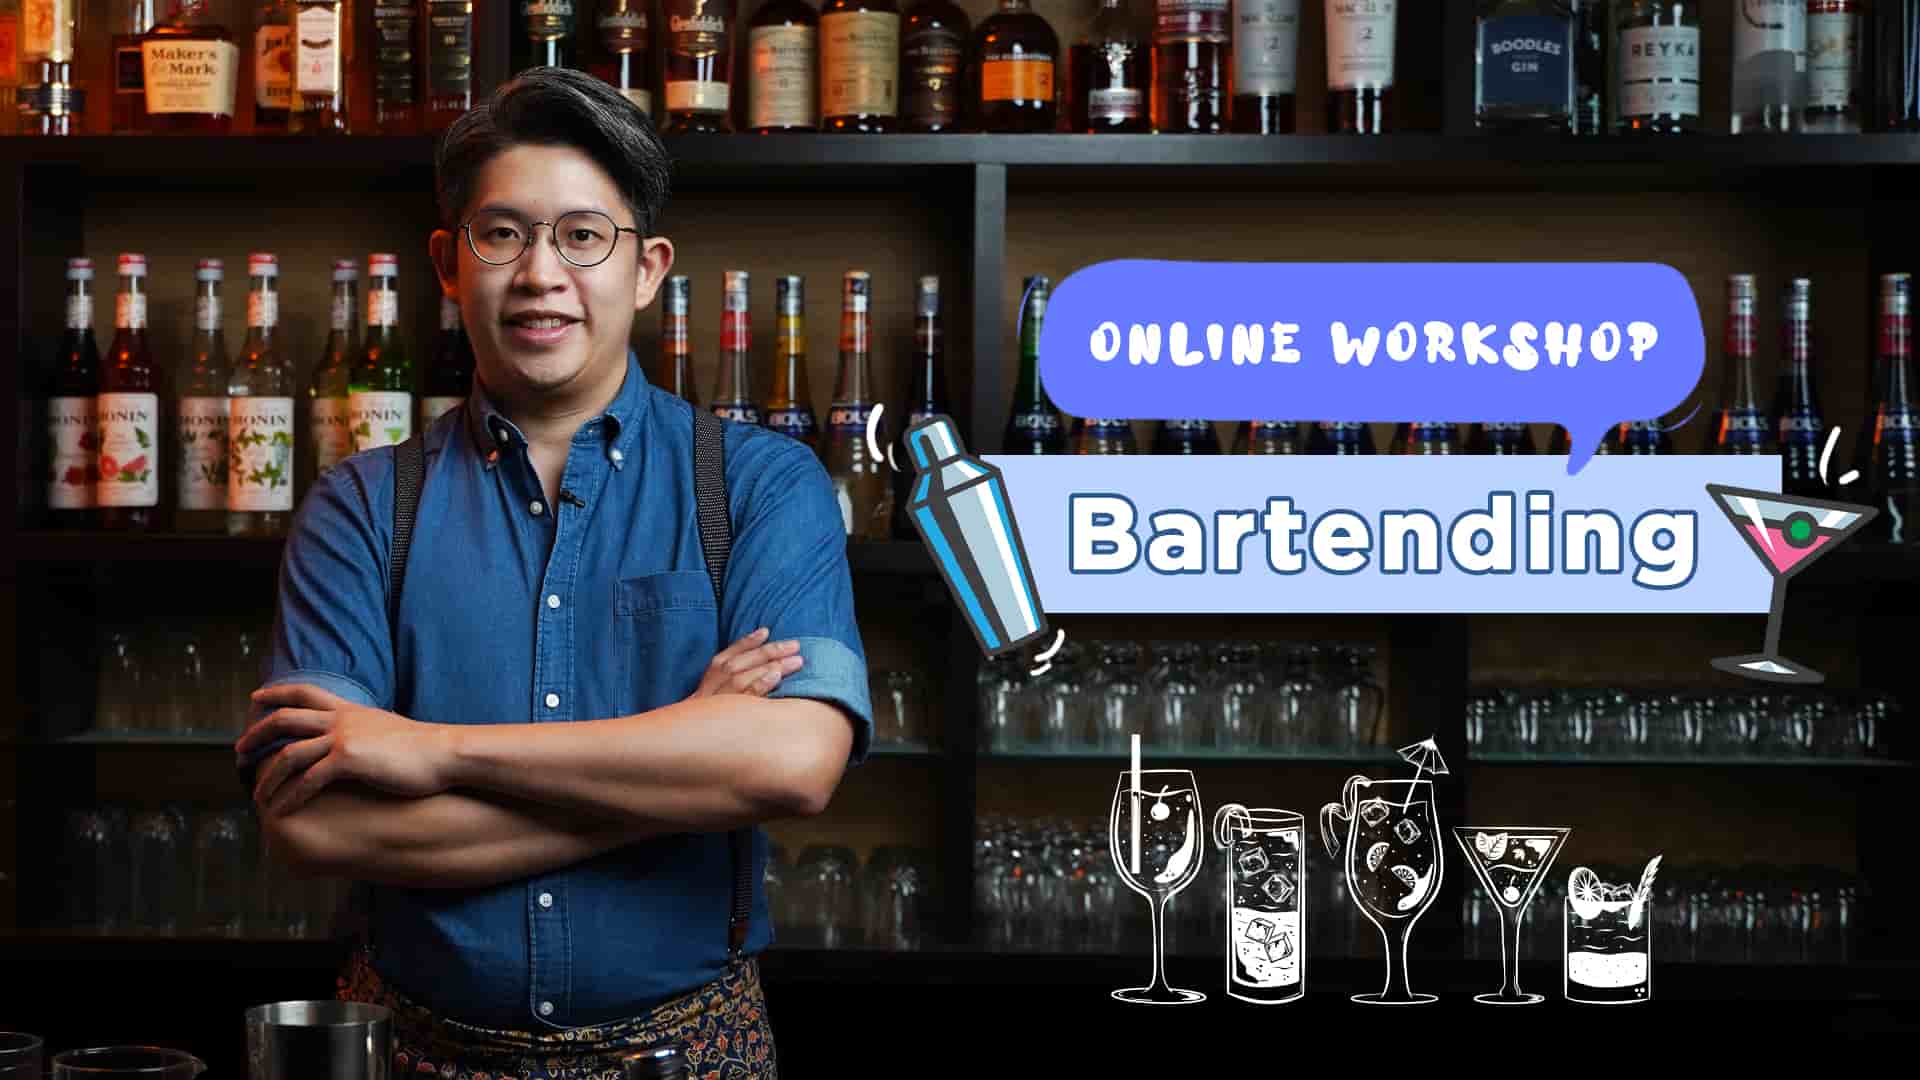 Bartending 101 Workshop with Diageo World-Class Malaysia Champion